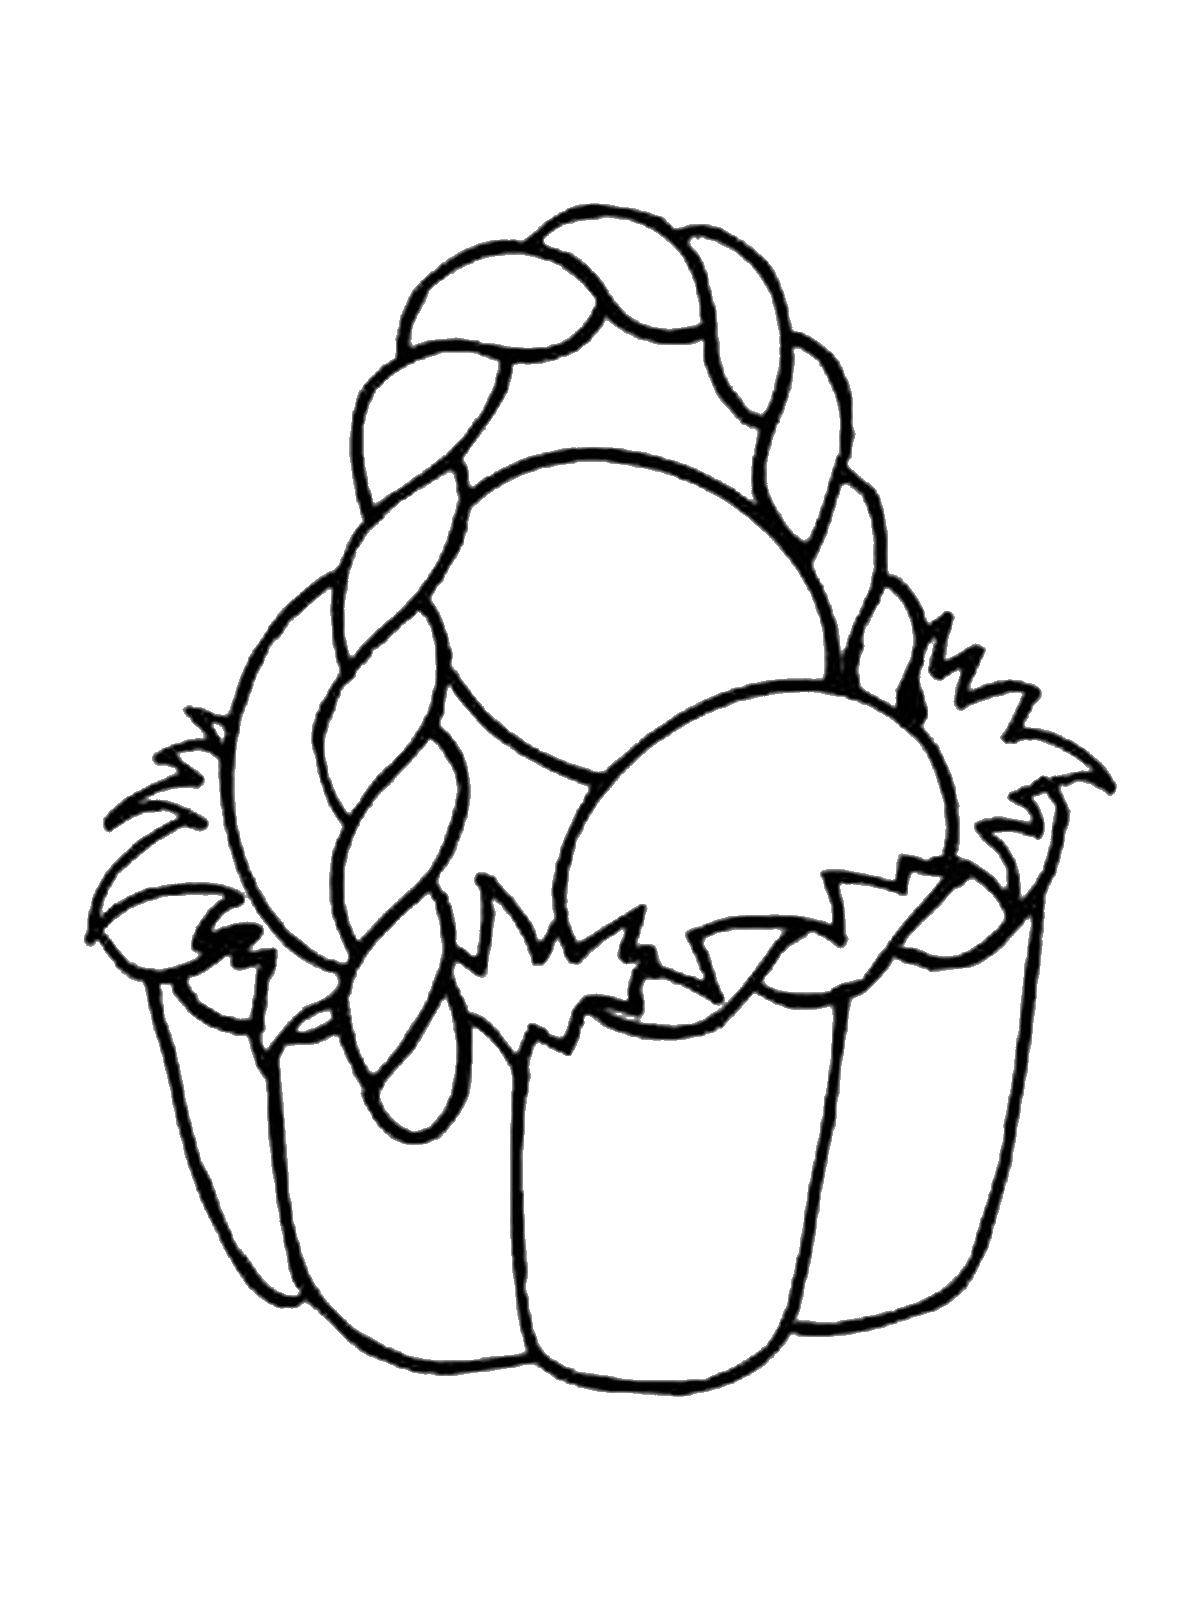 Coloring Wicker basket with eggs. Category coloring Easter. Tags:  Easter, eggs, patterns.